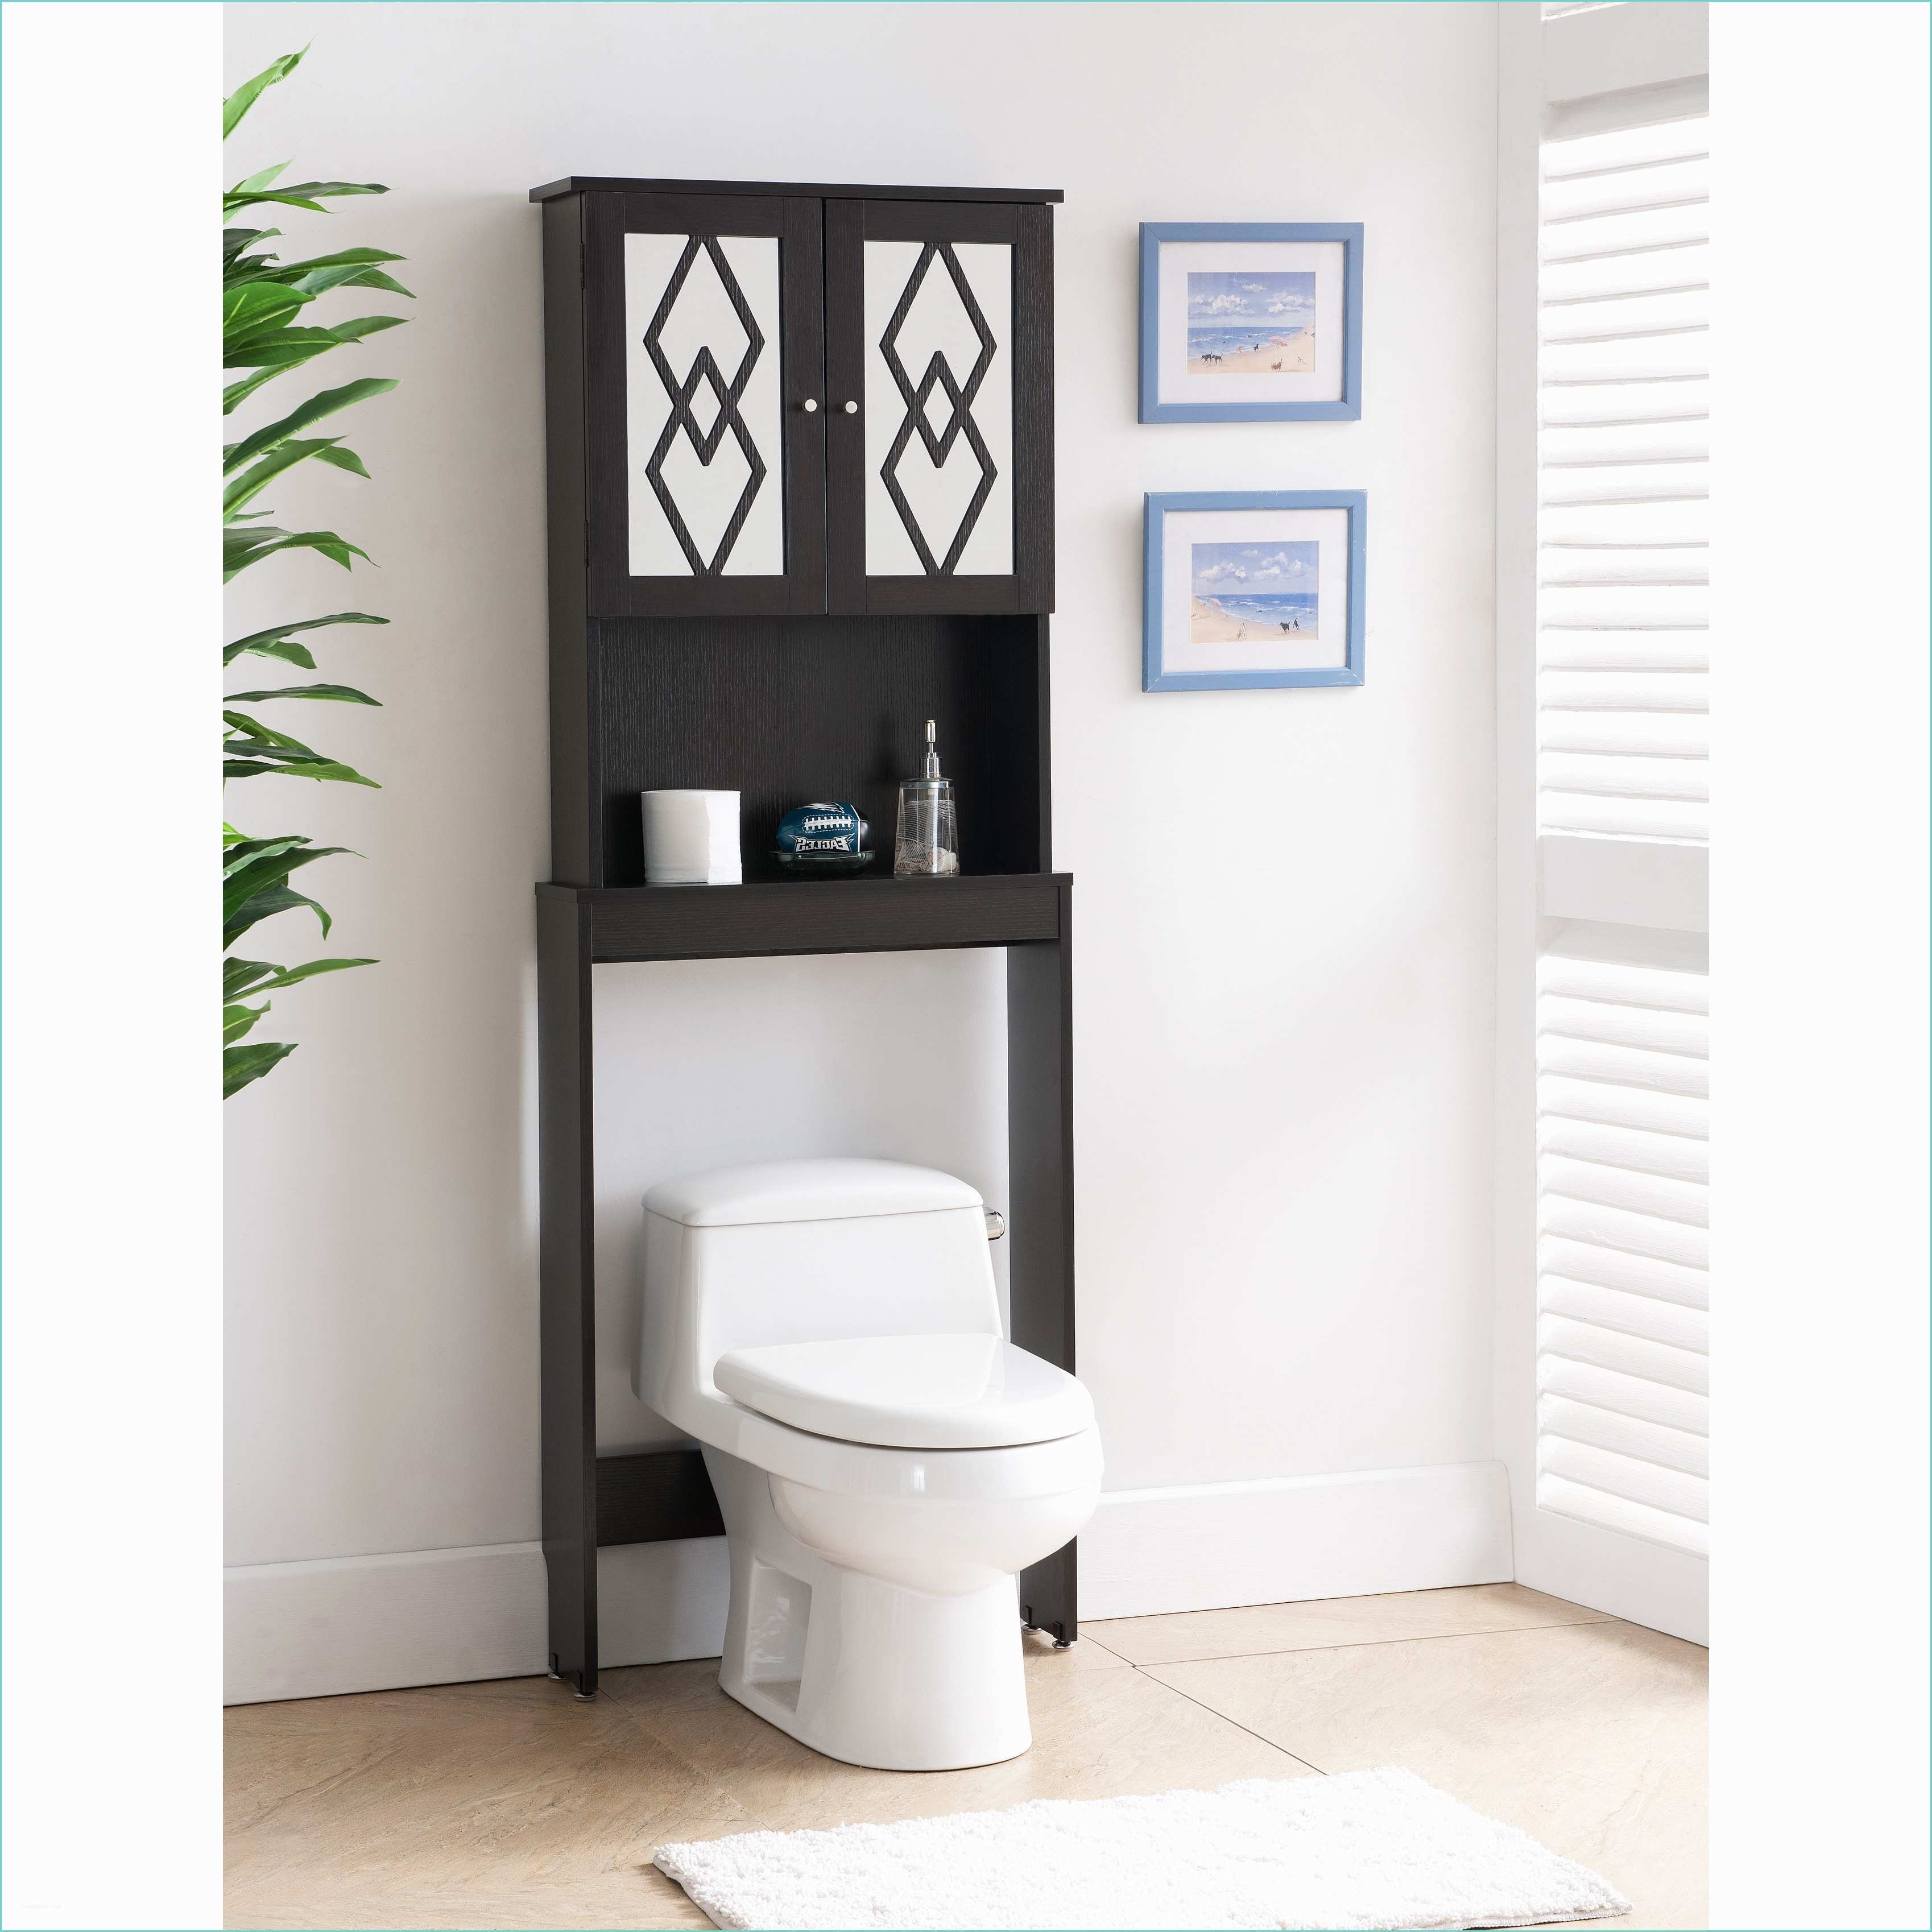 Over the toilet Etagere Ikea Over toilet Shelves Ikea Lowes Bathroom Cabinets Wall